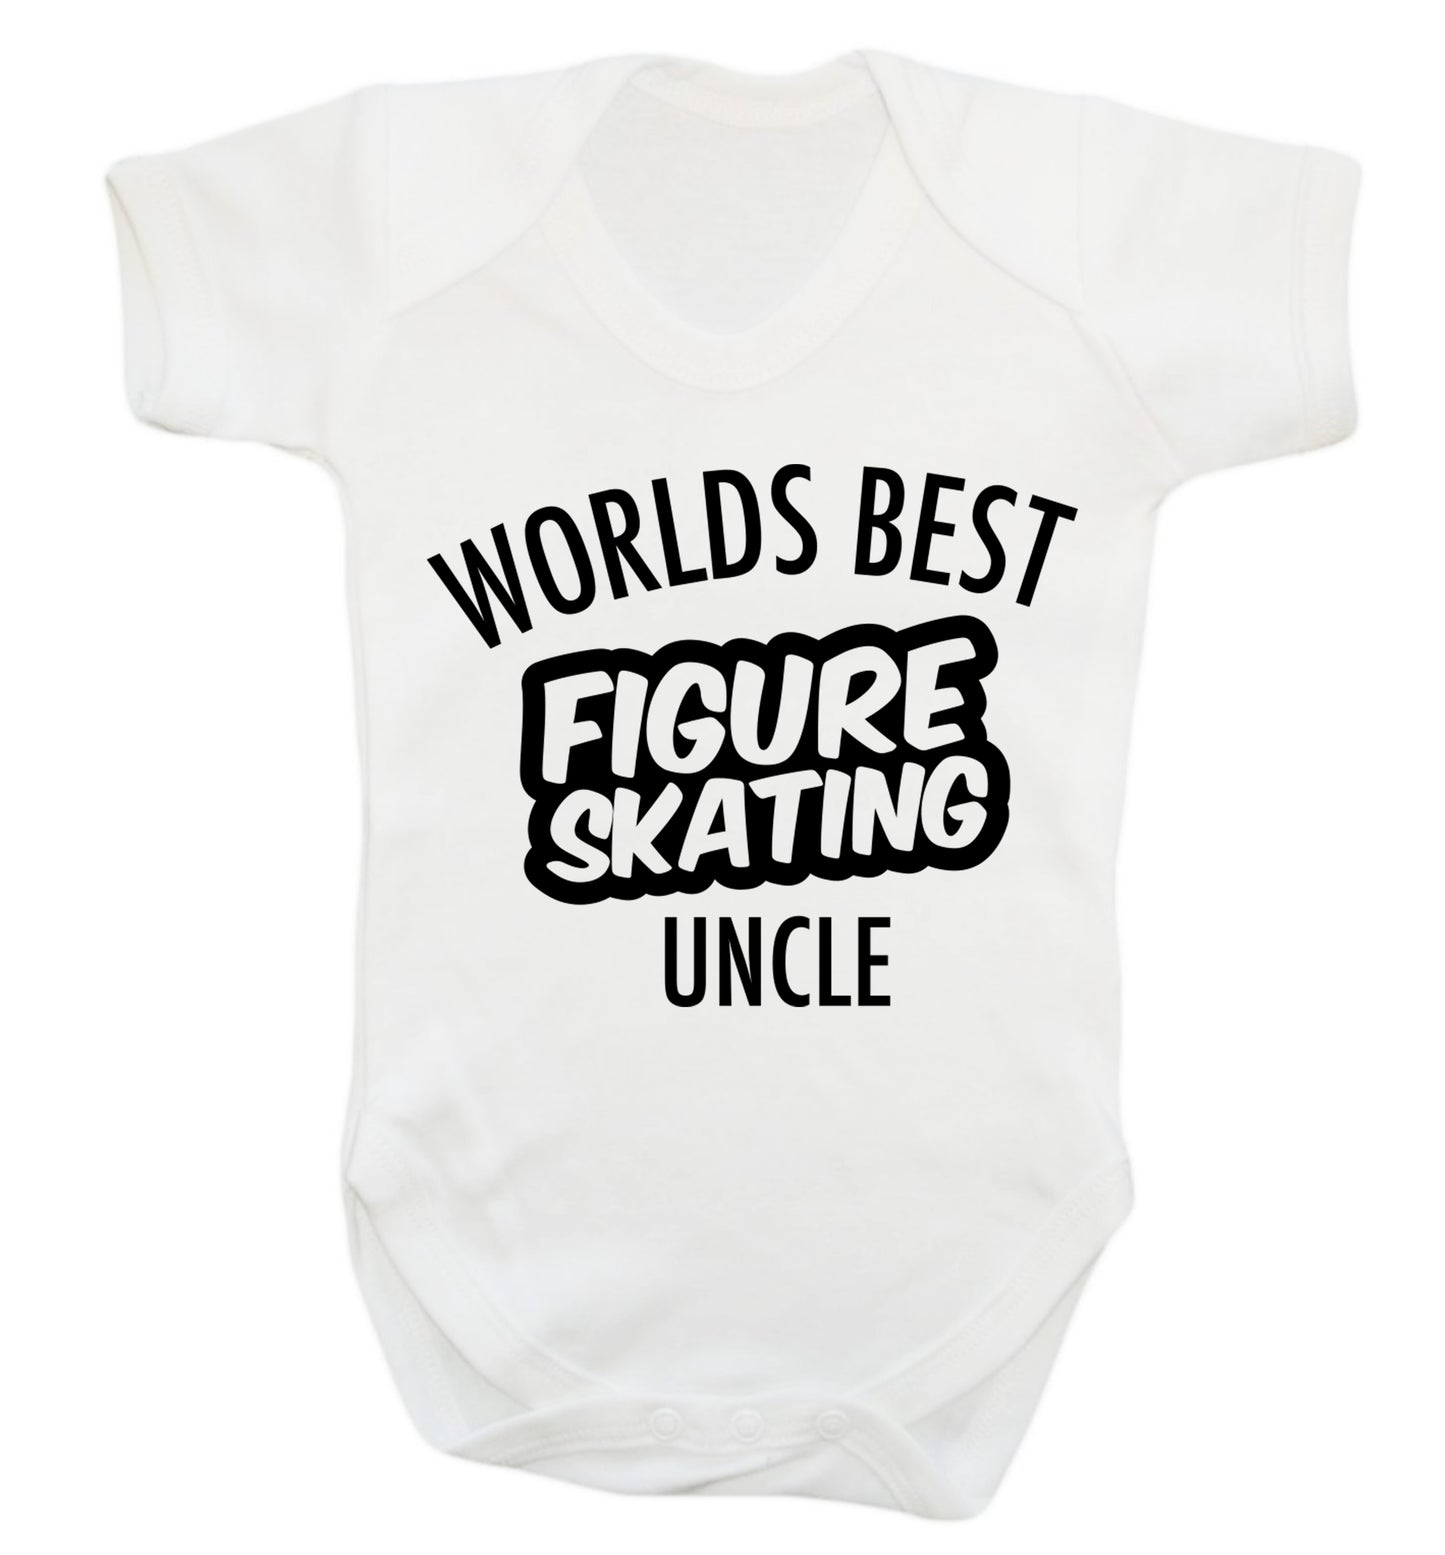 Worlds best figure skating uncle Baby Vest white 18-24 months